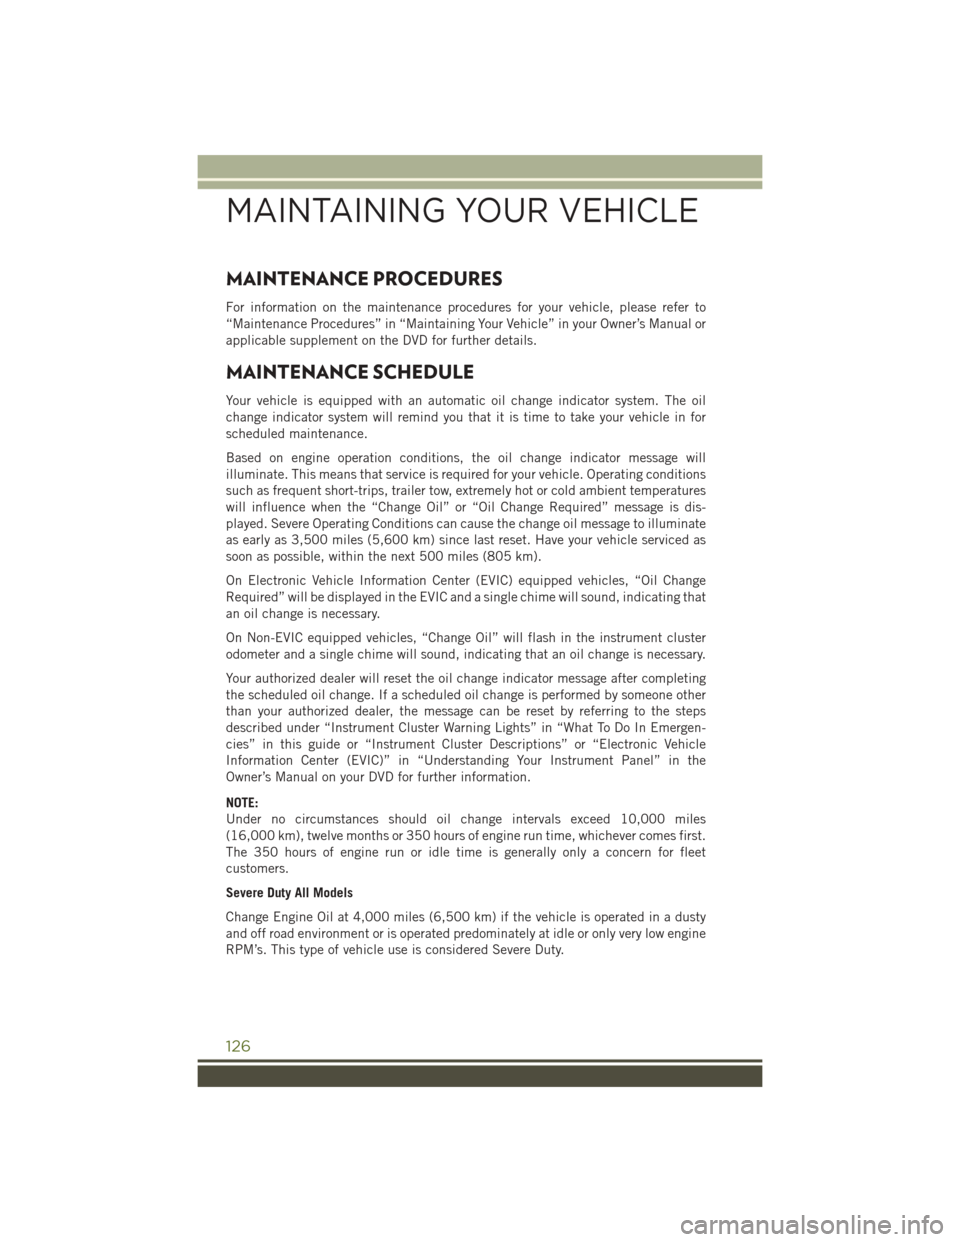 JEEP WRANGLER 2016 JK / 3.G User Guide MAINTENANCE PROCEDURES
For information on the maintenance procedures for your vehicle, please refer to
“Maintenance Procedures” in “Maintaining Your Vehicle” in your Owner’s Manual or
applic